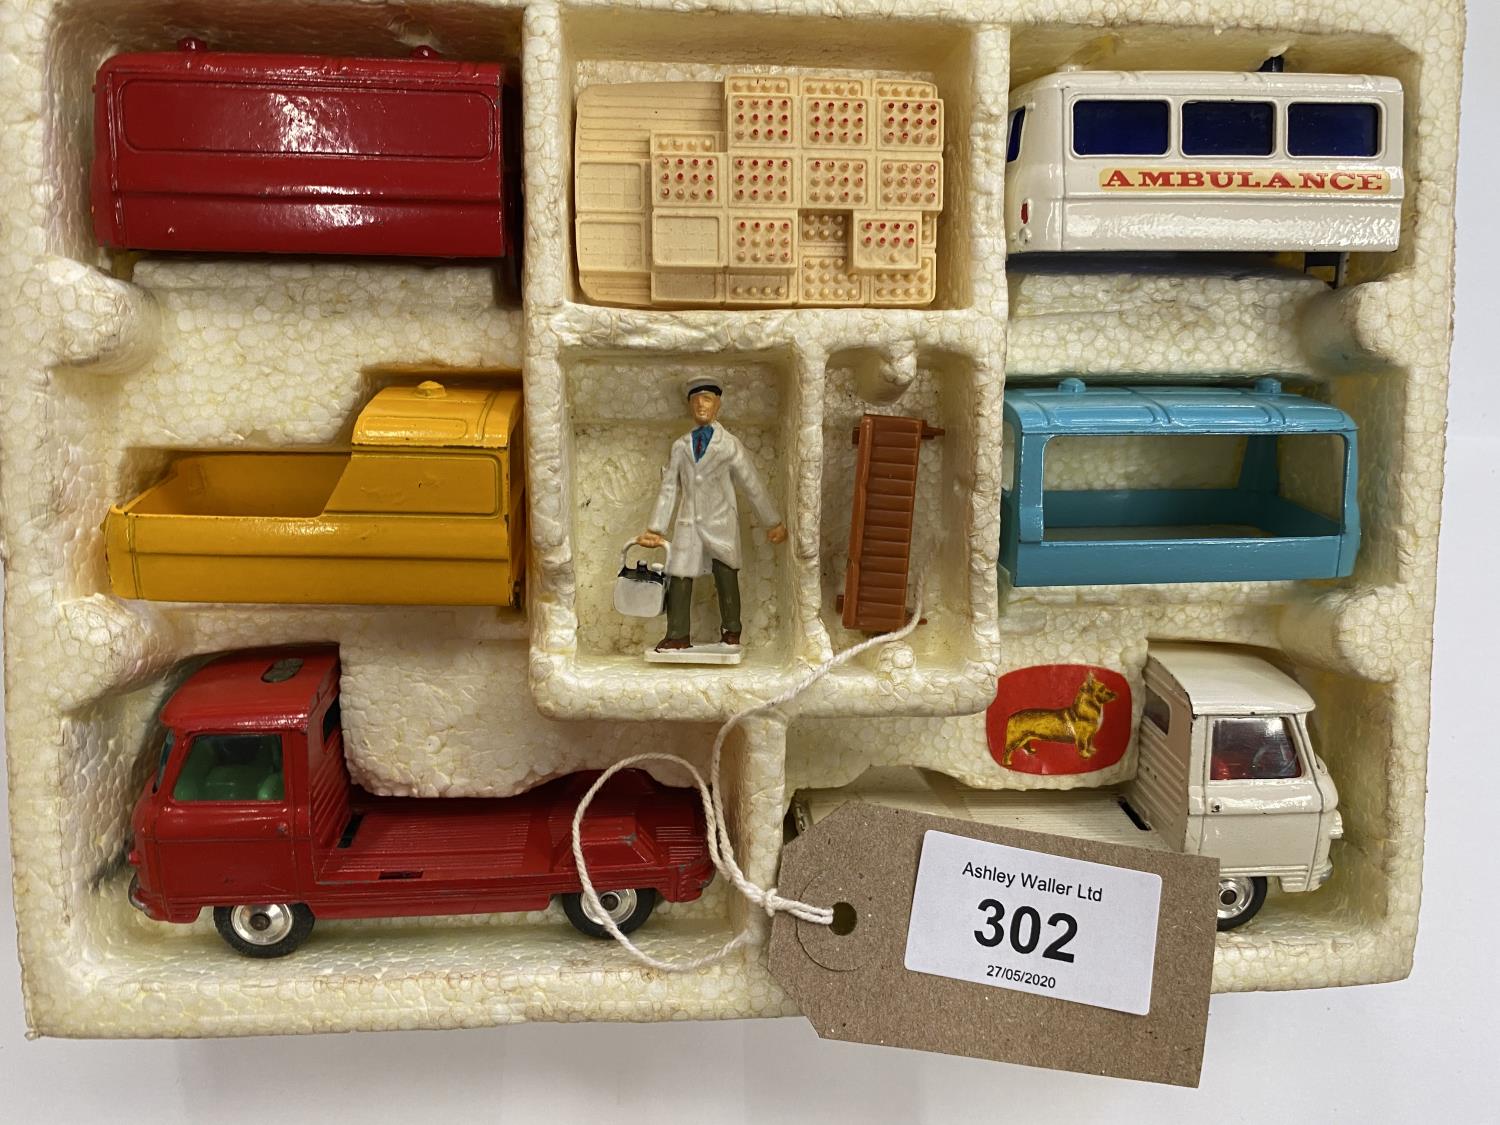 A CORGI CONSTRUCTOR SET (COMMER ¾ TON CHASSIS) IN ORIGINAL BOX - MODEL NUMBER GS/24 - Image 2 of 3